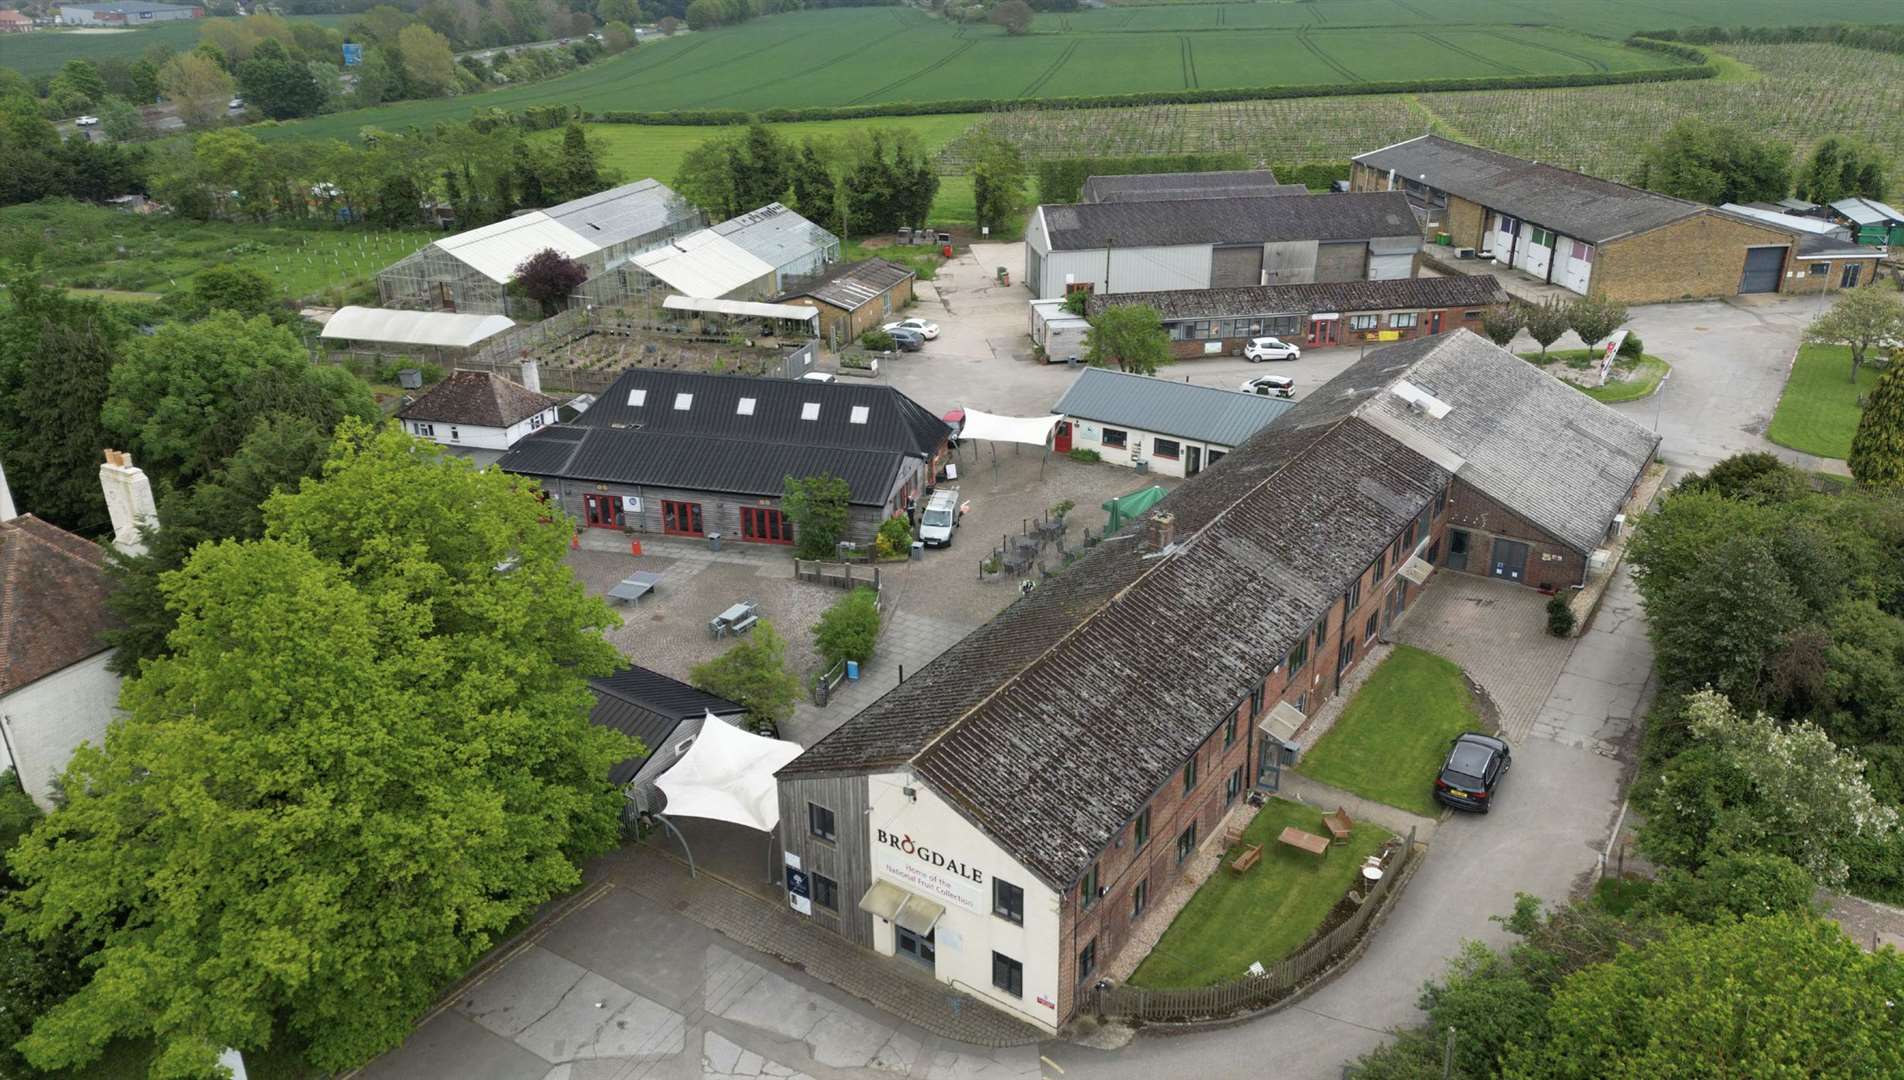 Brogdale Farm could be sold off as part of a multi-million pound deal. Picture: George Webb Finn